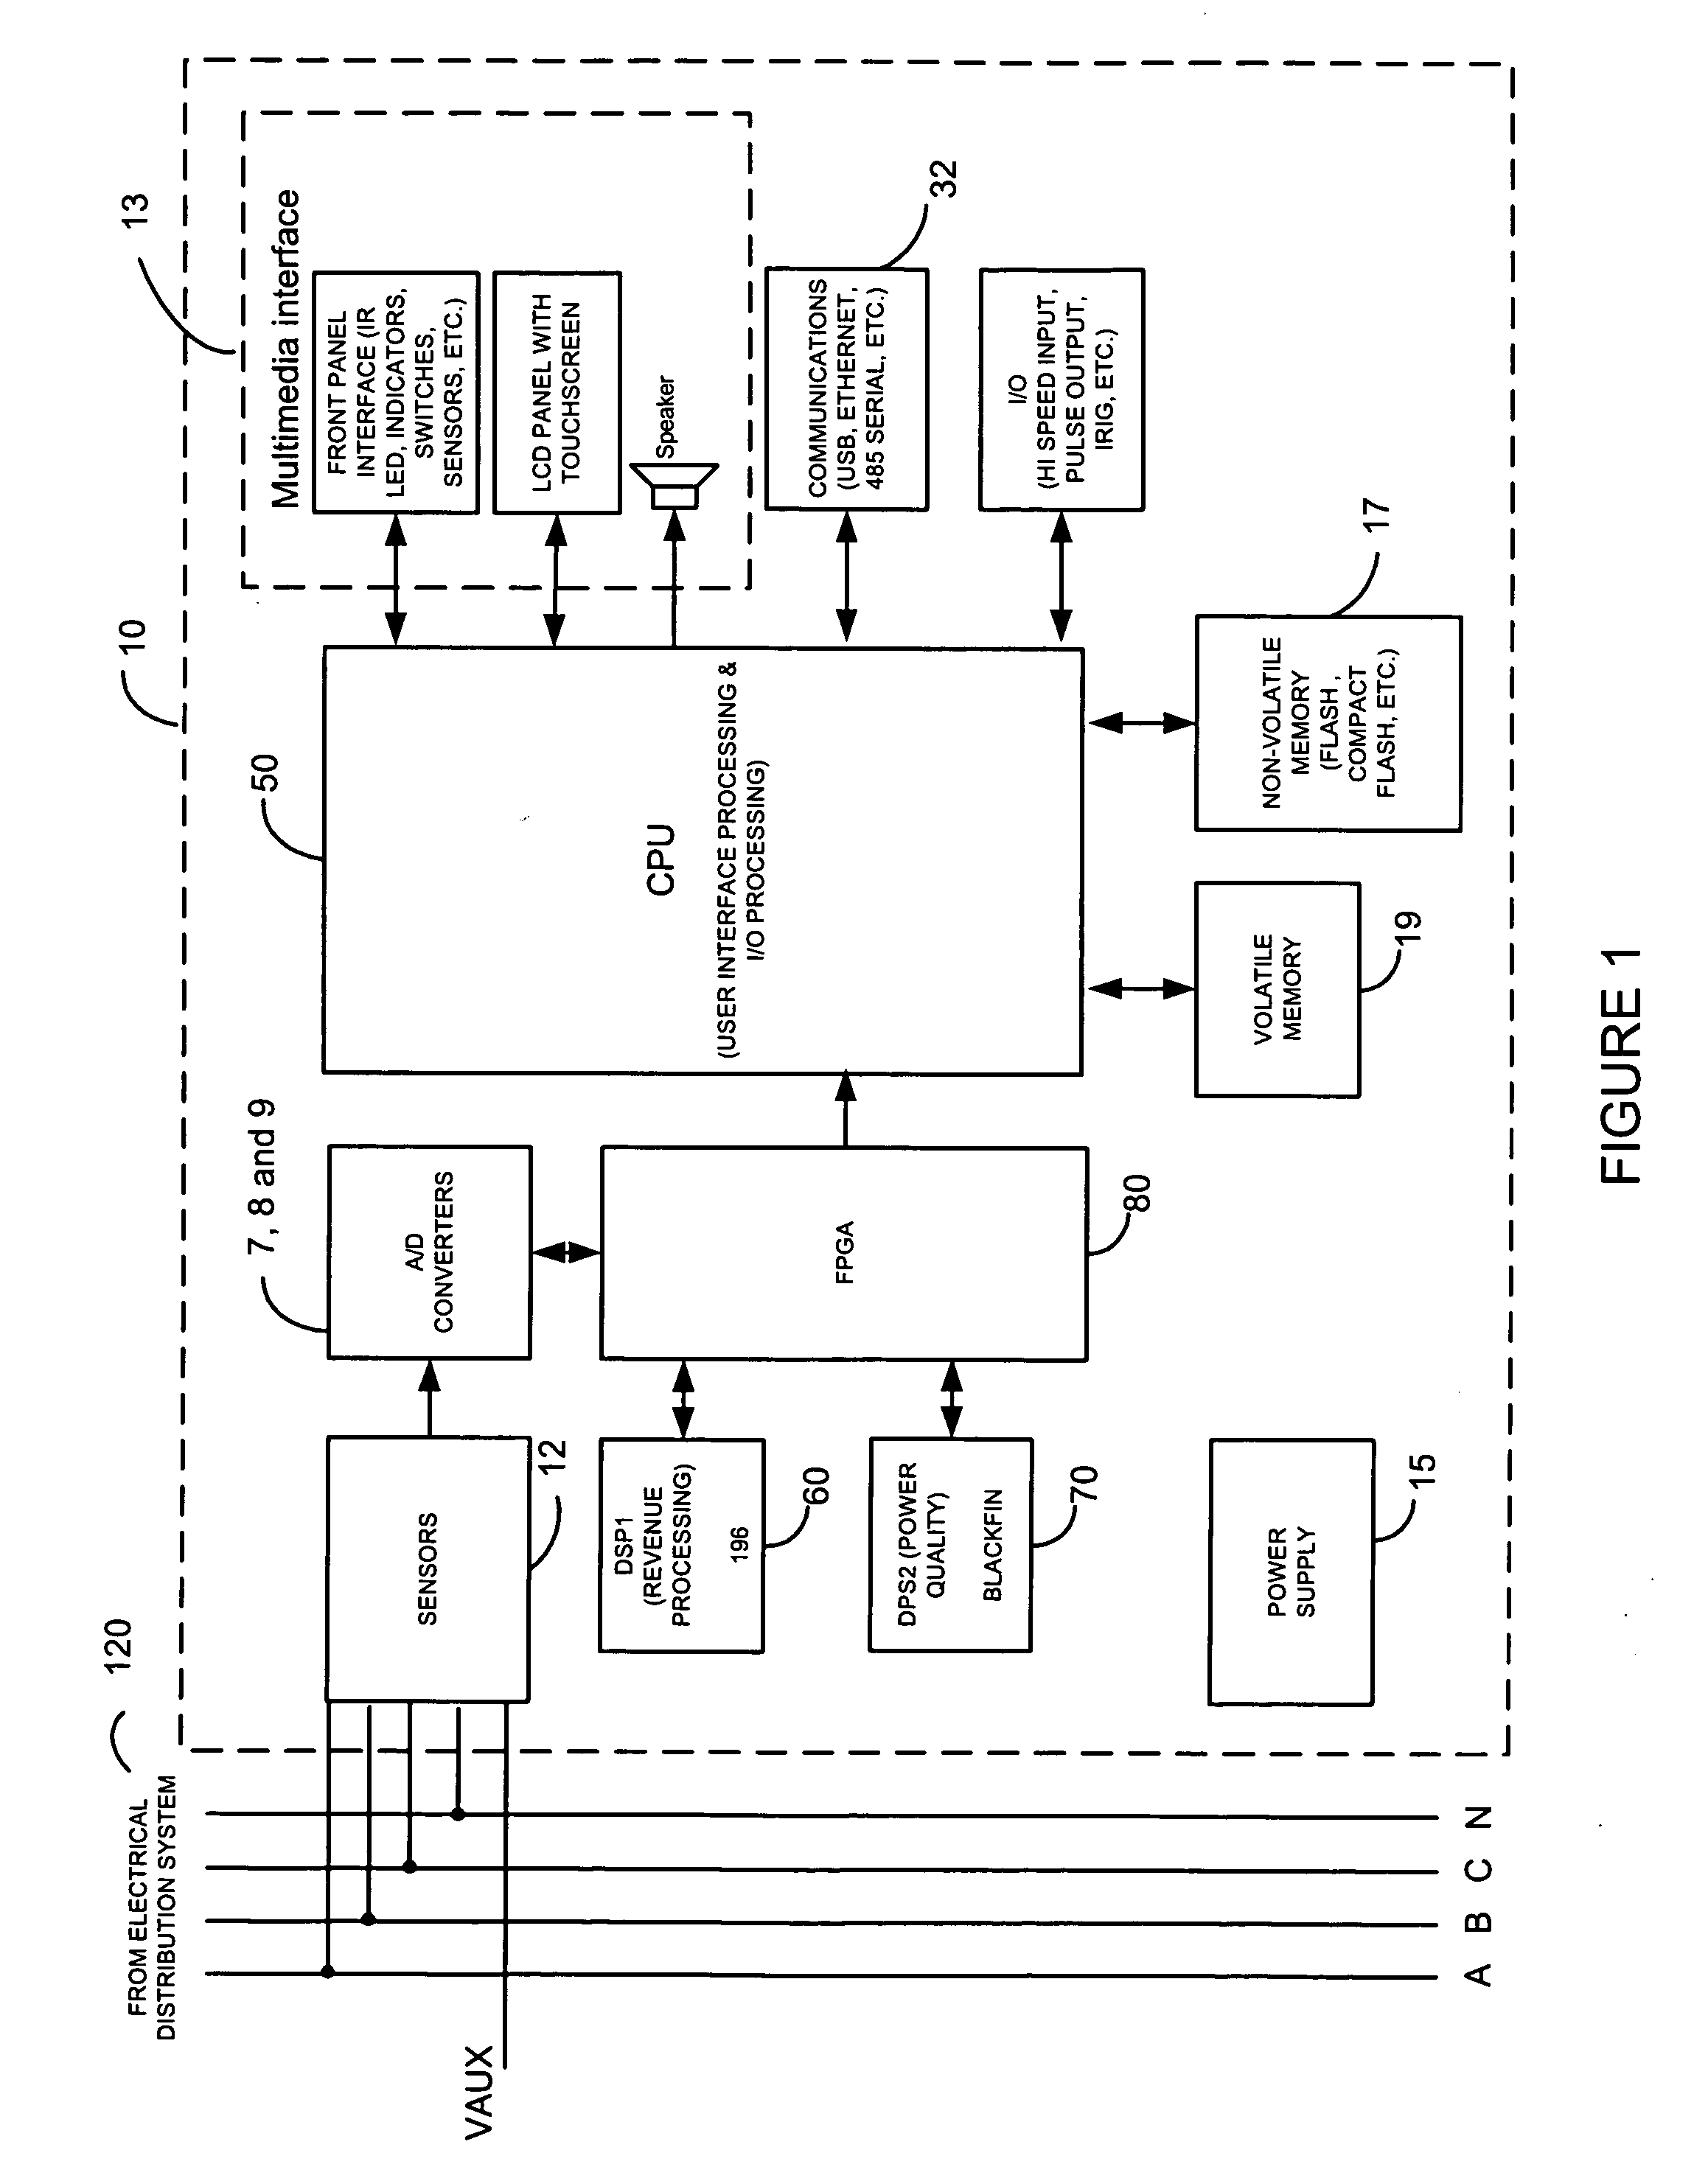 High speed digital transient waveform detection system and method for use in an intelligent device